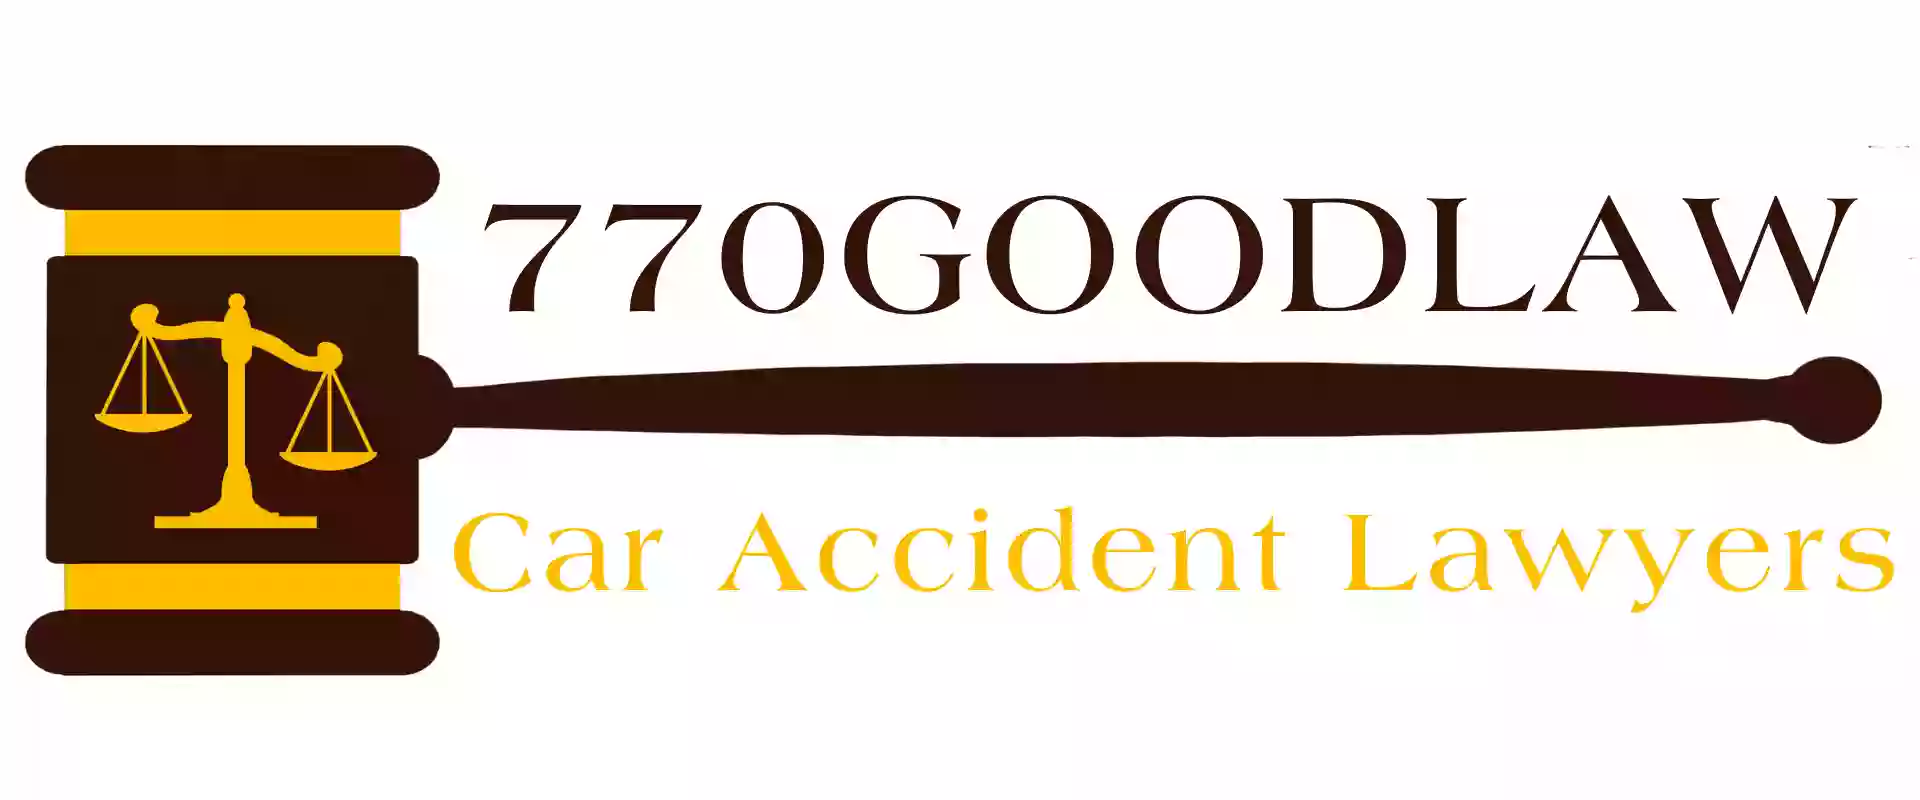 770GOODLAW, Riverdale Car Accident Lawyers